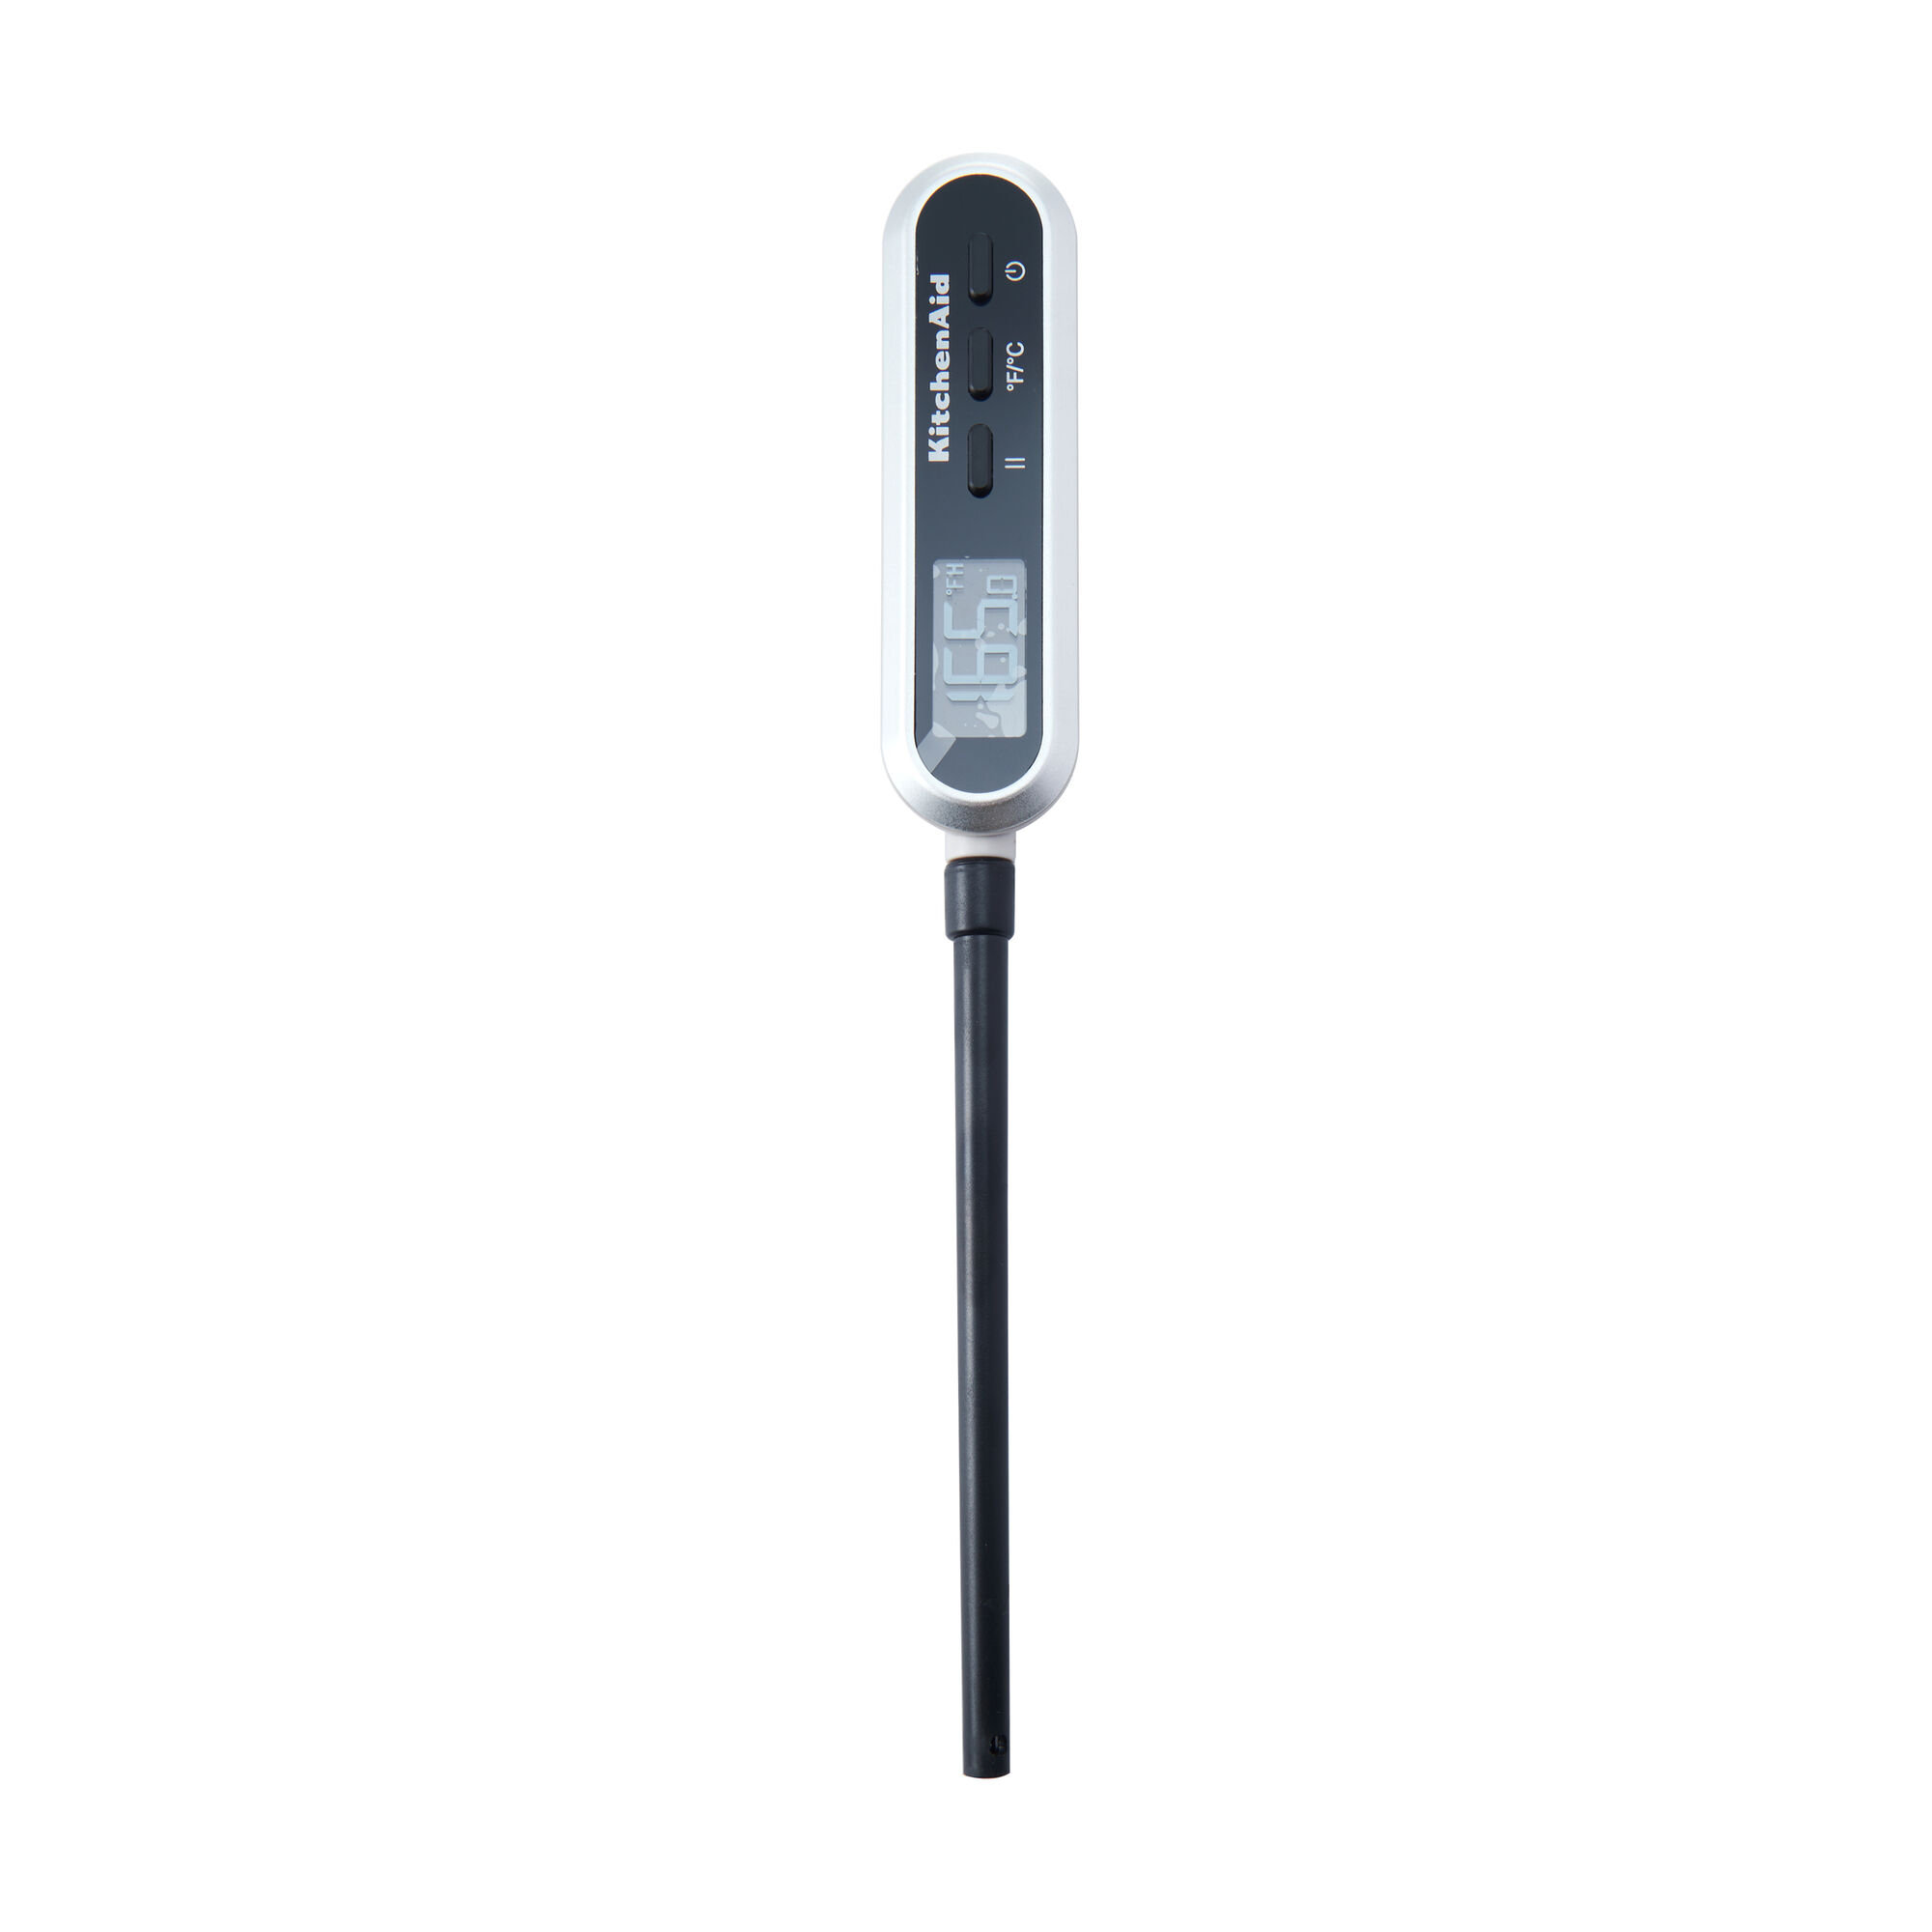 KitchenAid Programmable Wired Probe Thermometer with Temperature